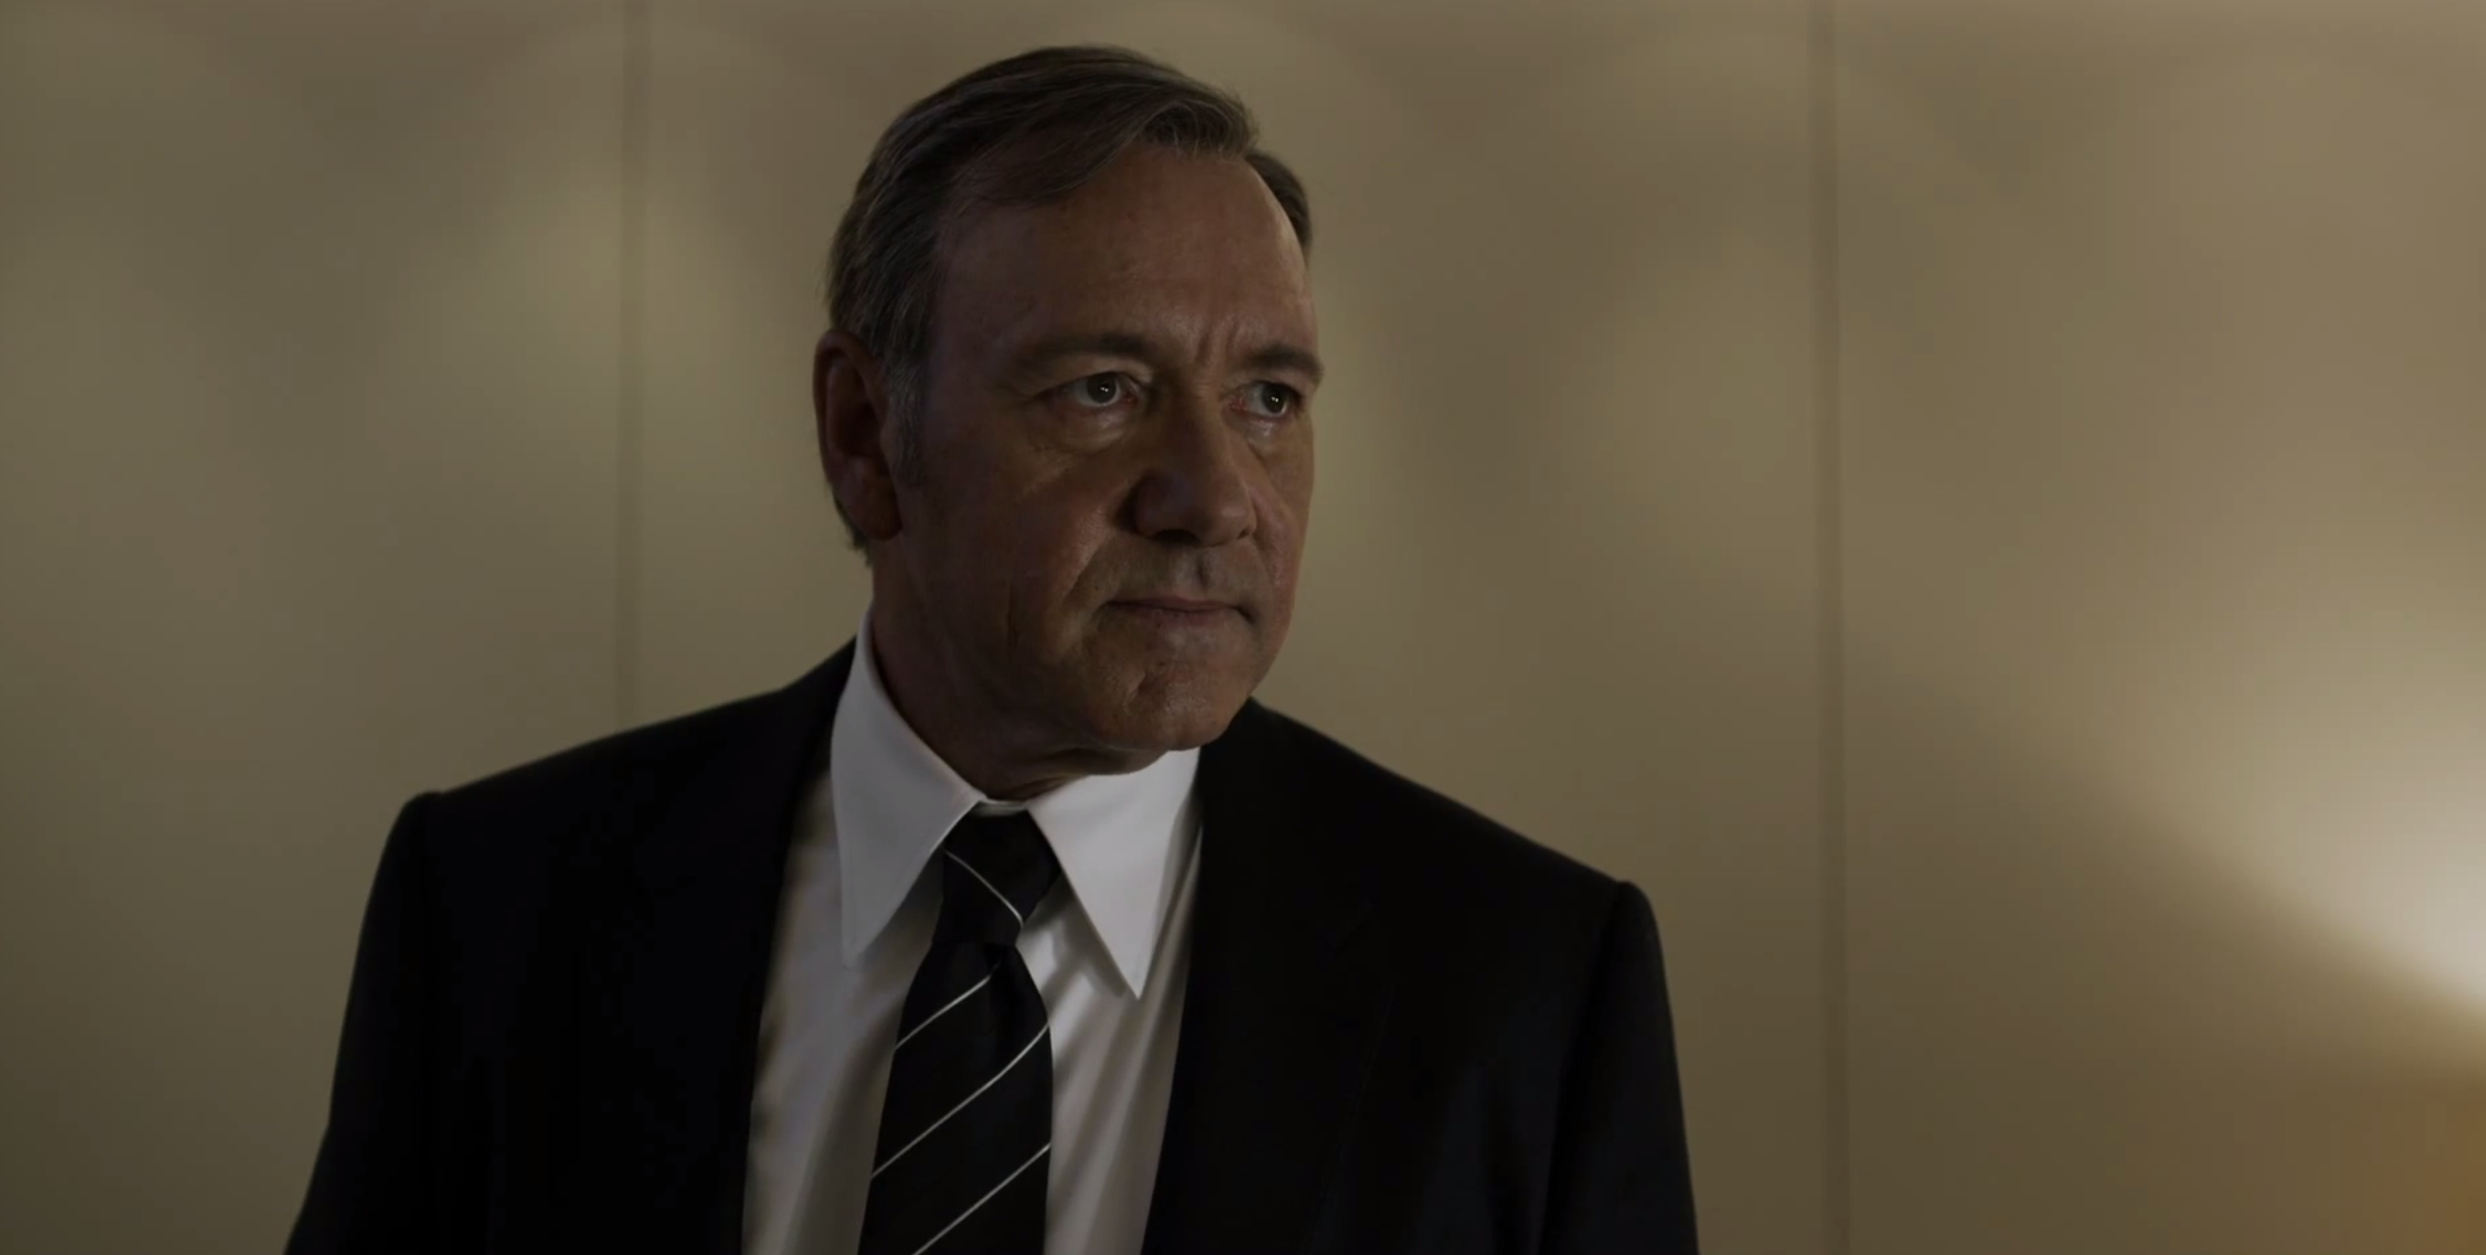 Kevin Spacey als Frank Underwood in House of Cards. Foto: Netflix